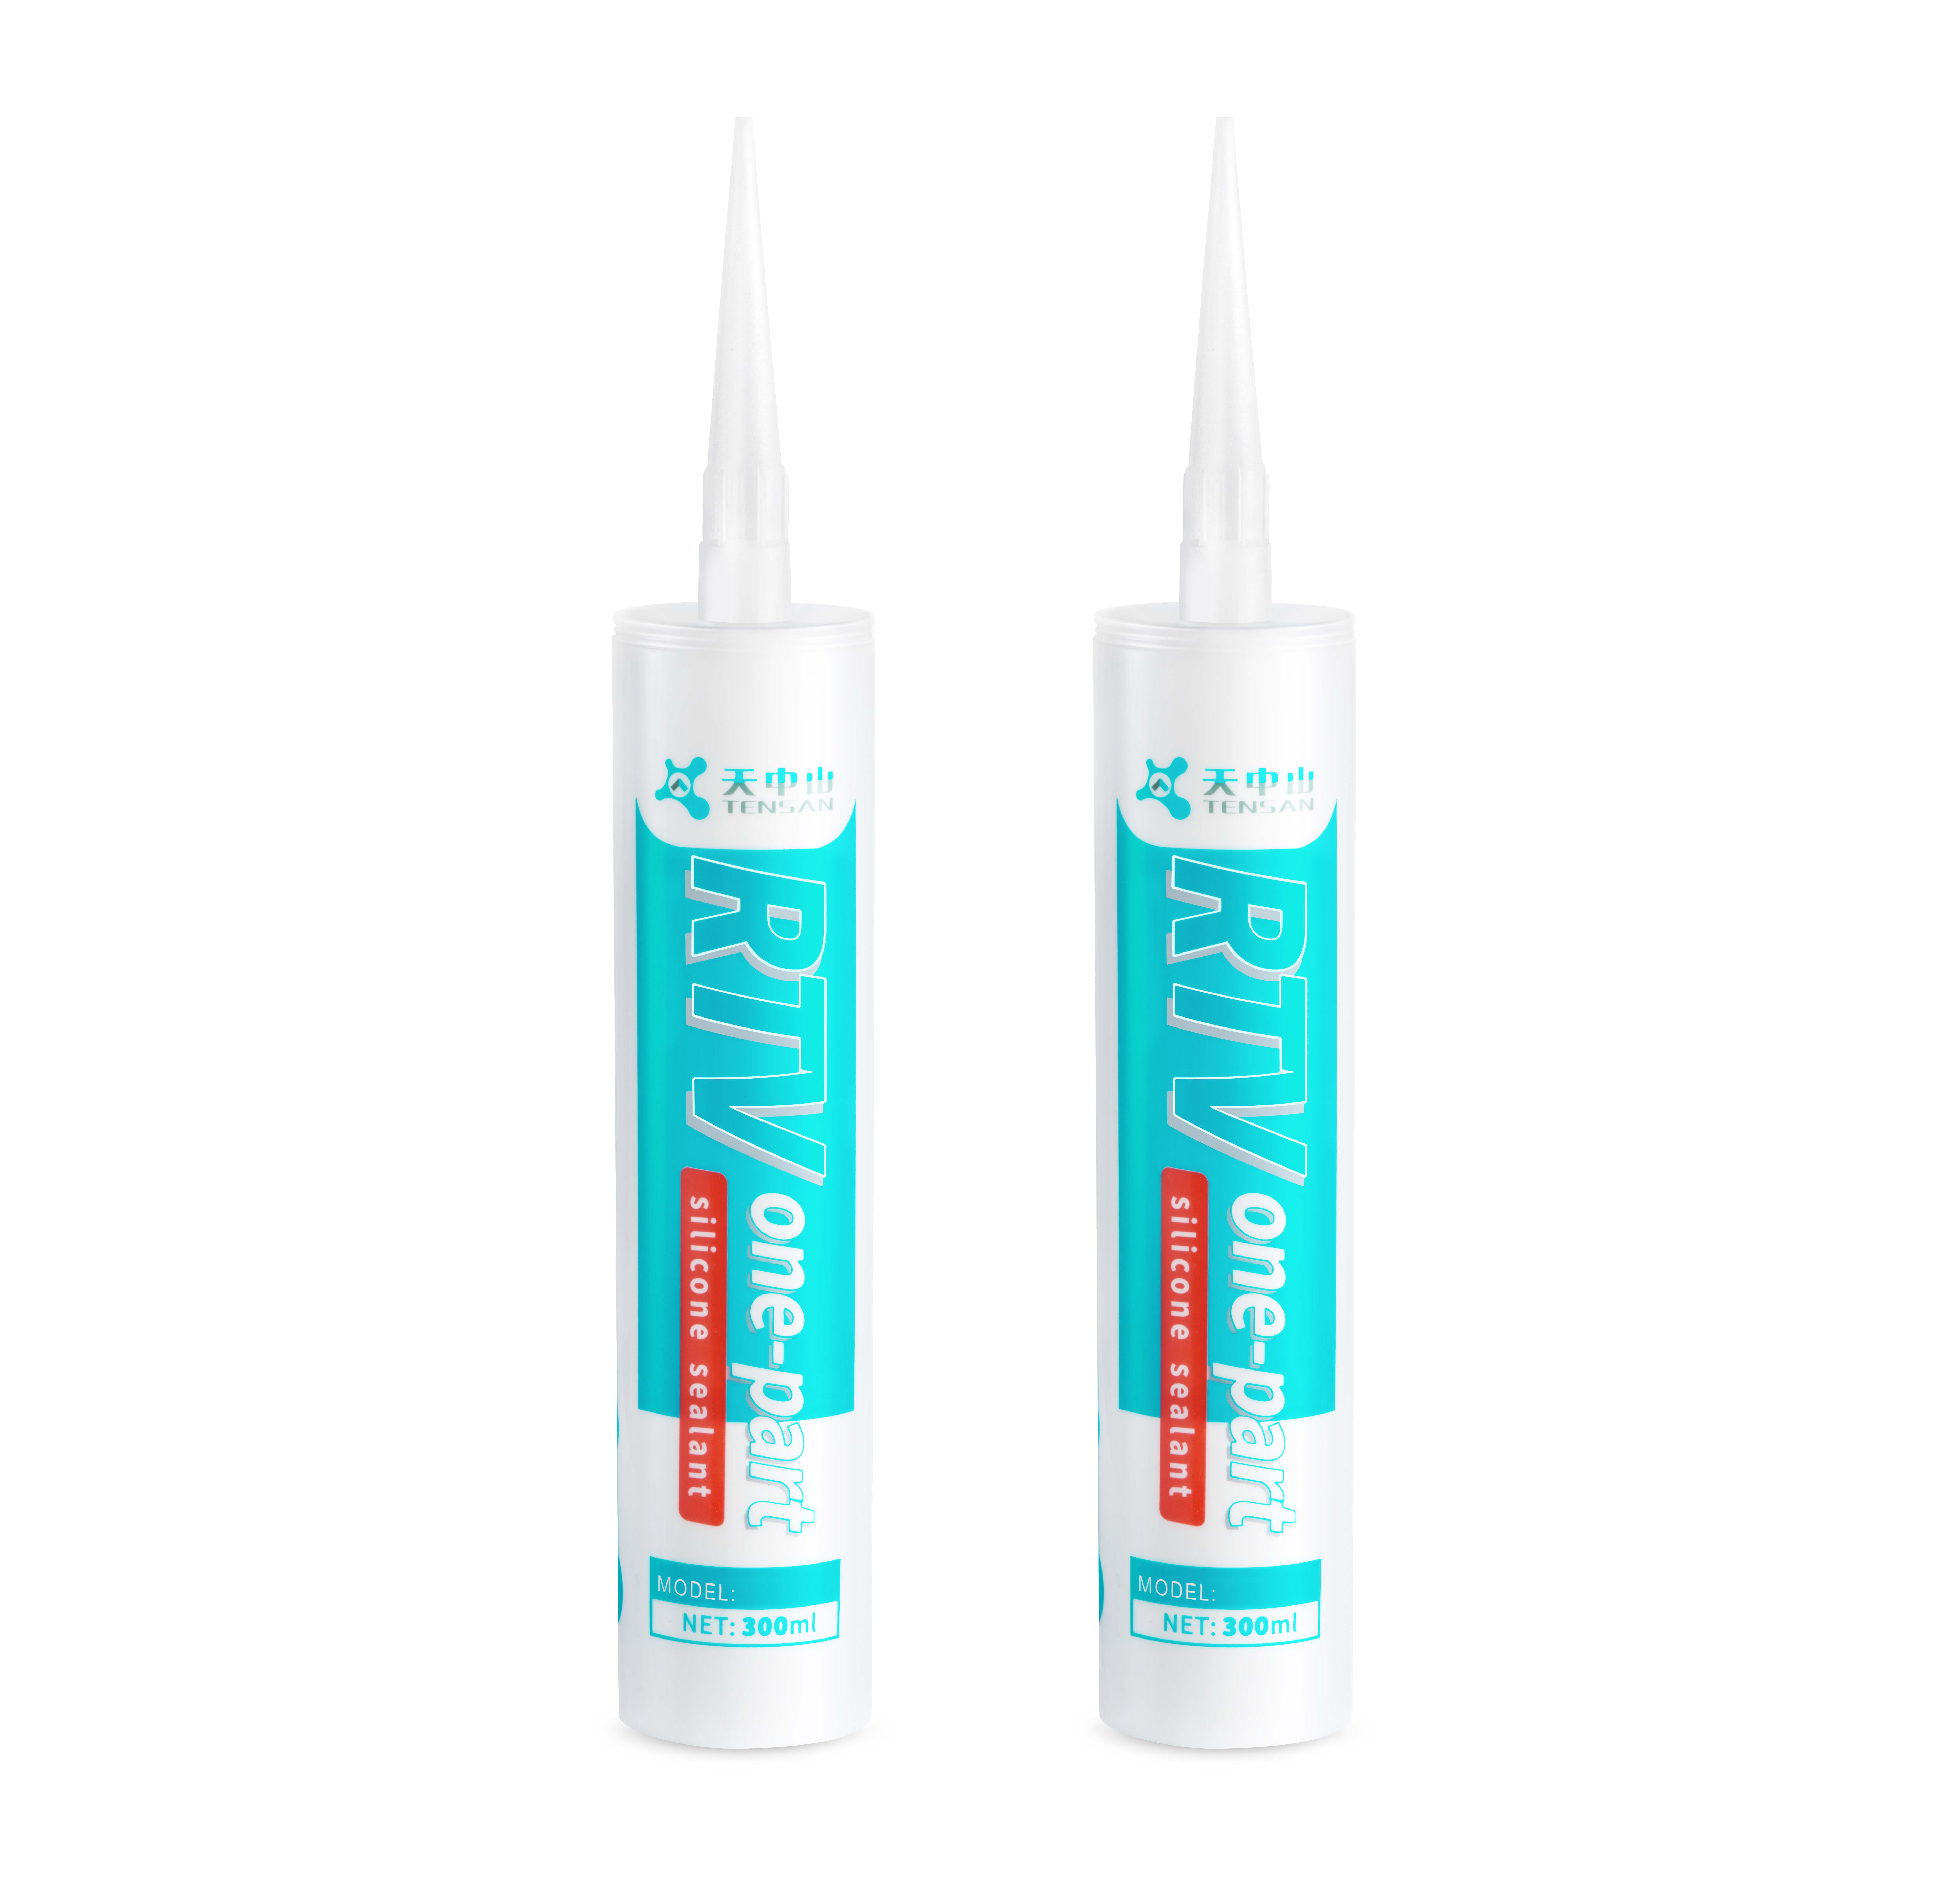 Which sealant is the best? What do good sealant manufacturers have in common?